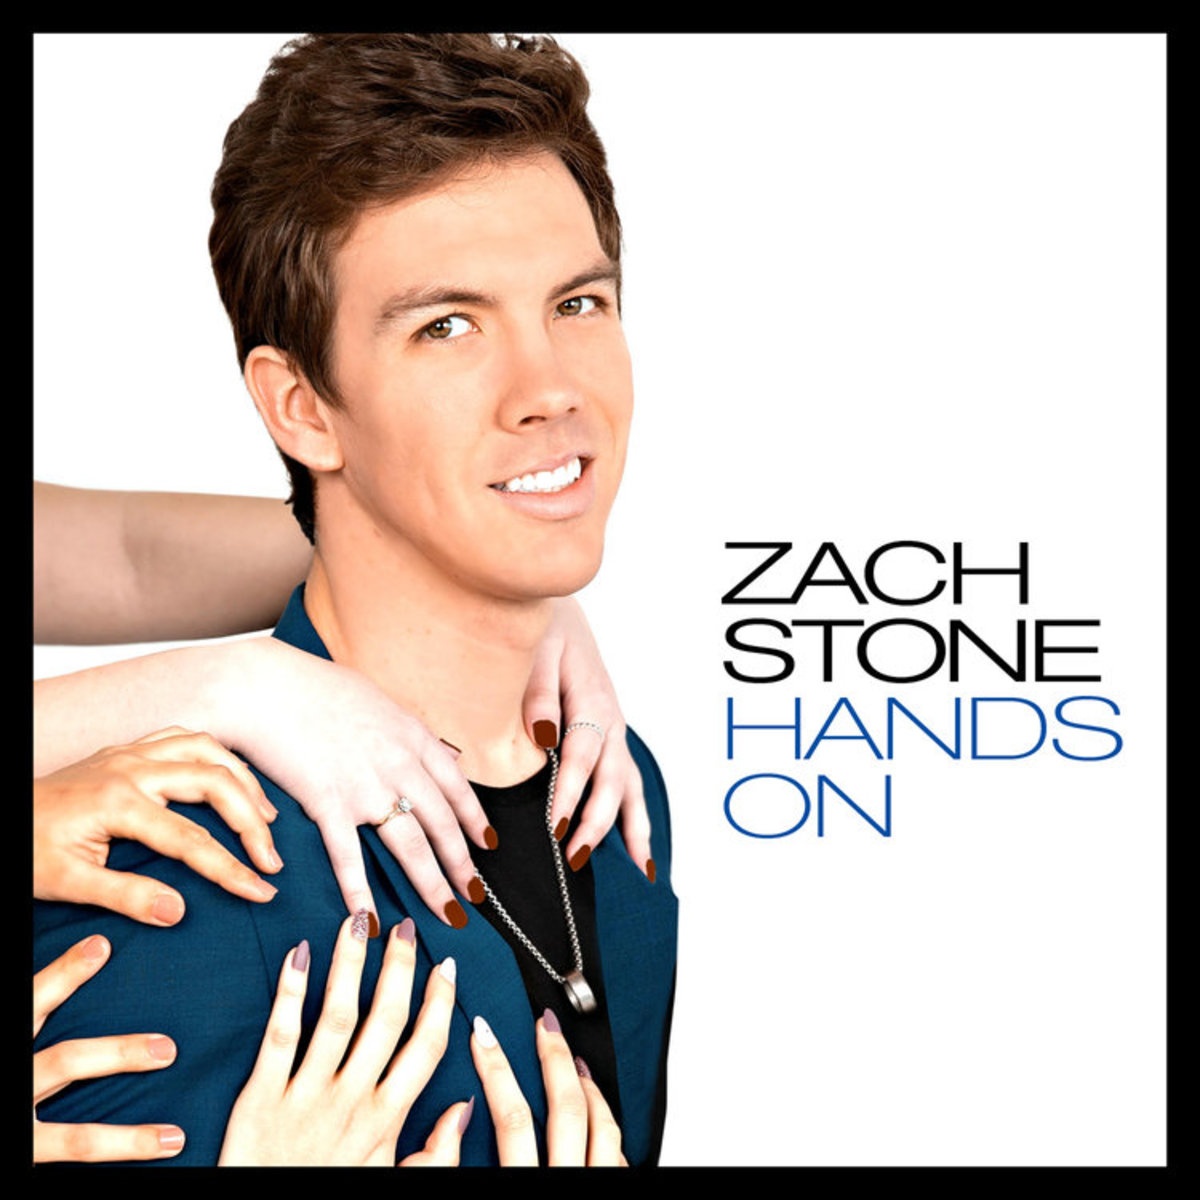 "Hands On" by Zach Stone